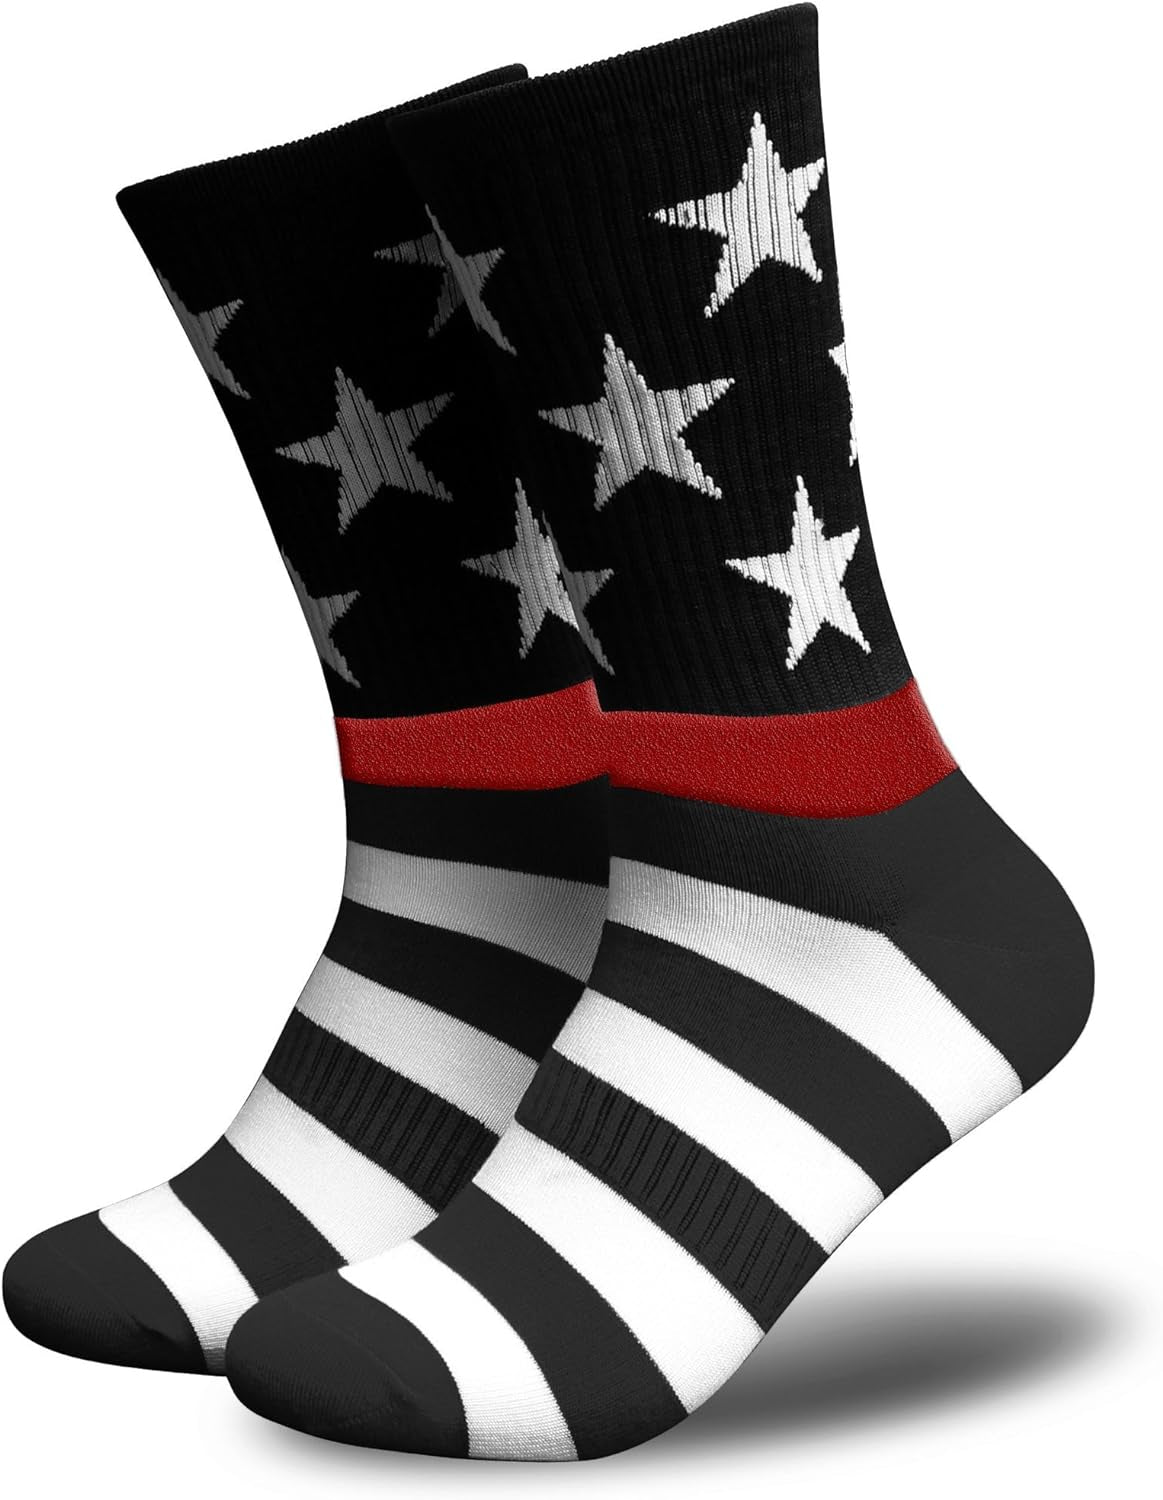 American Flag Socks for Men or Women - Perfect for Every Patriot - 86% Nylon, 12% Polyester, 2% Spandex